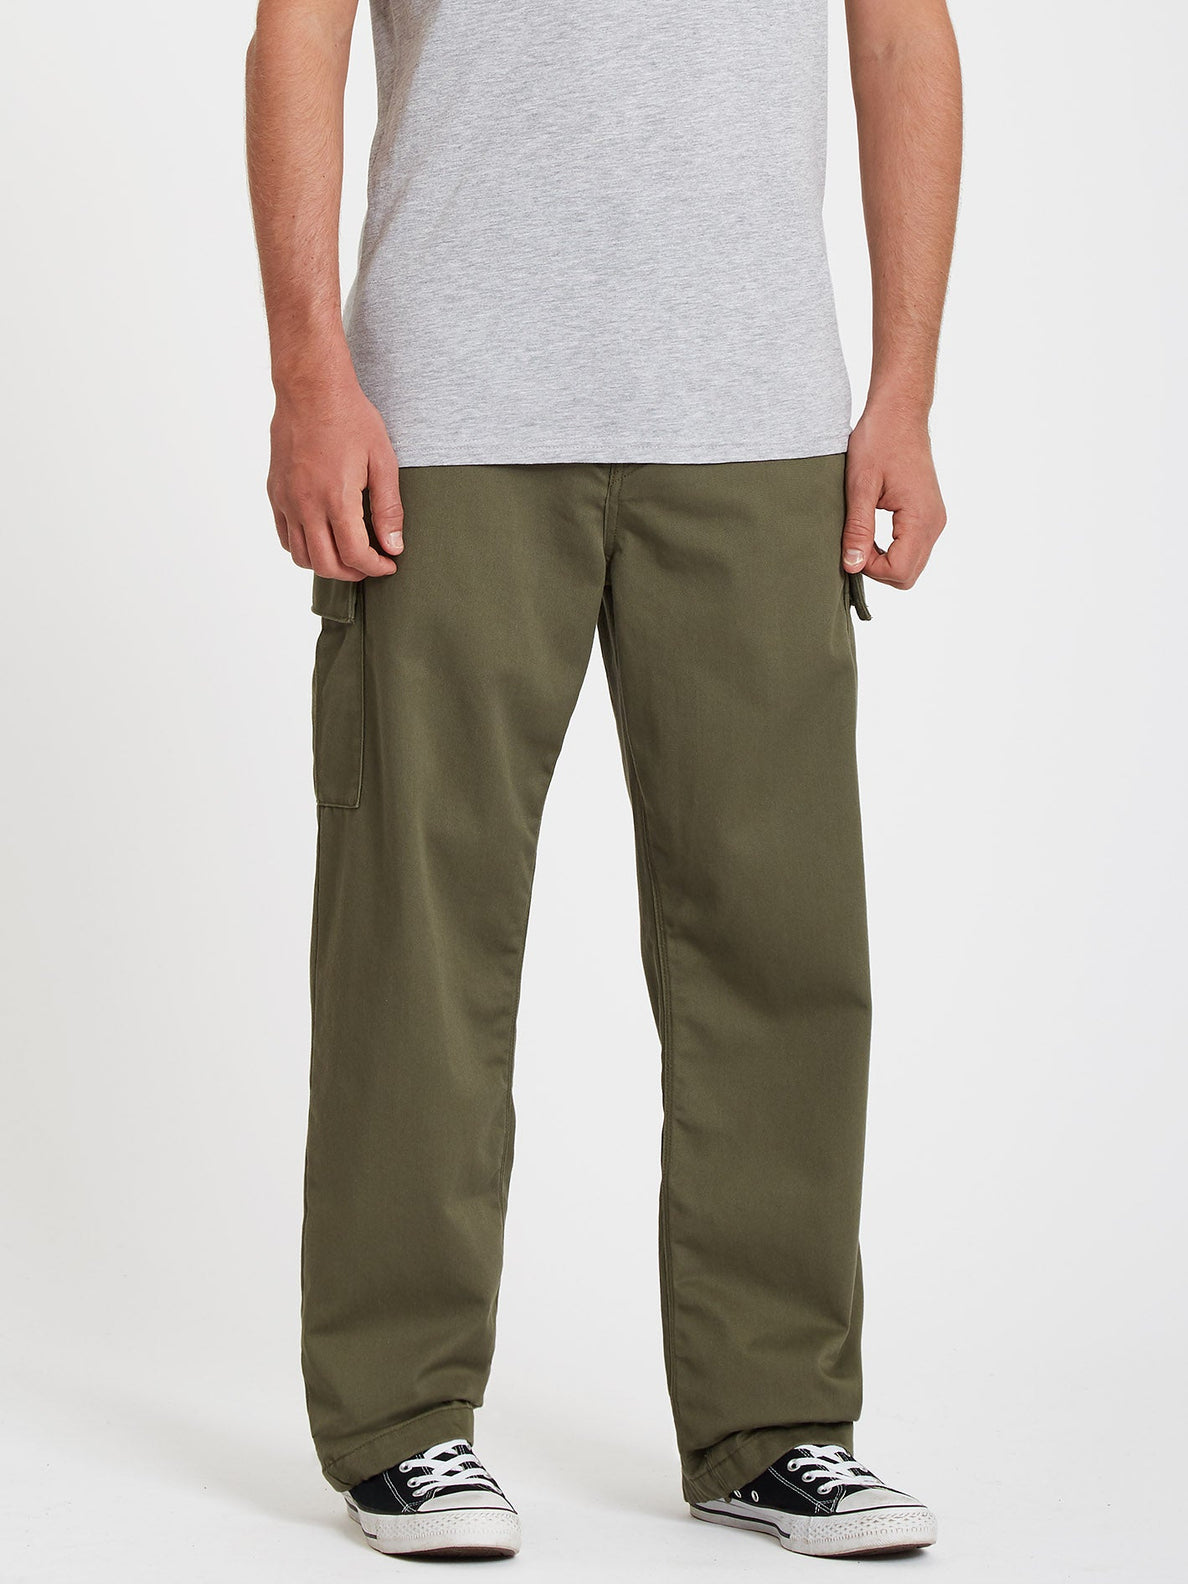 March Cargo Trousers - MILITARY (A1132102_MIL) [F]